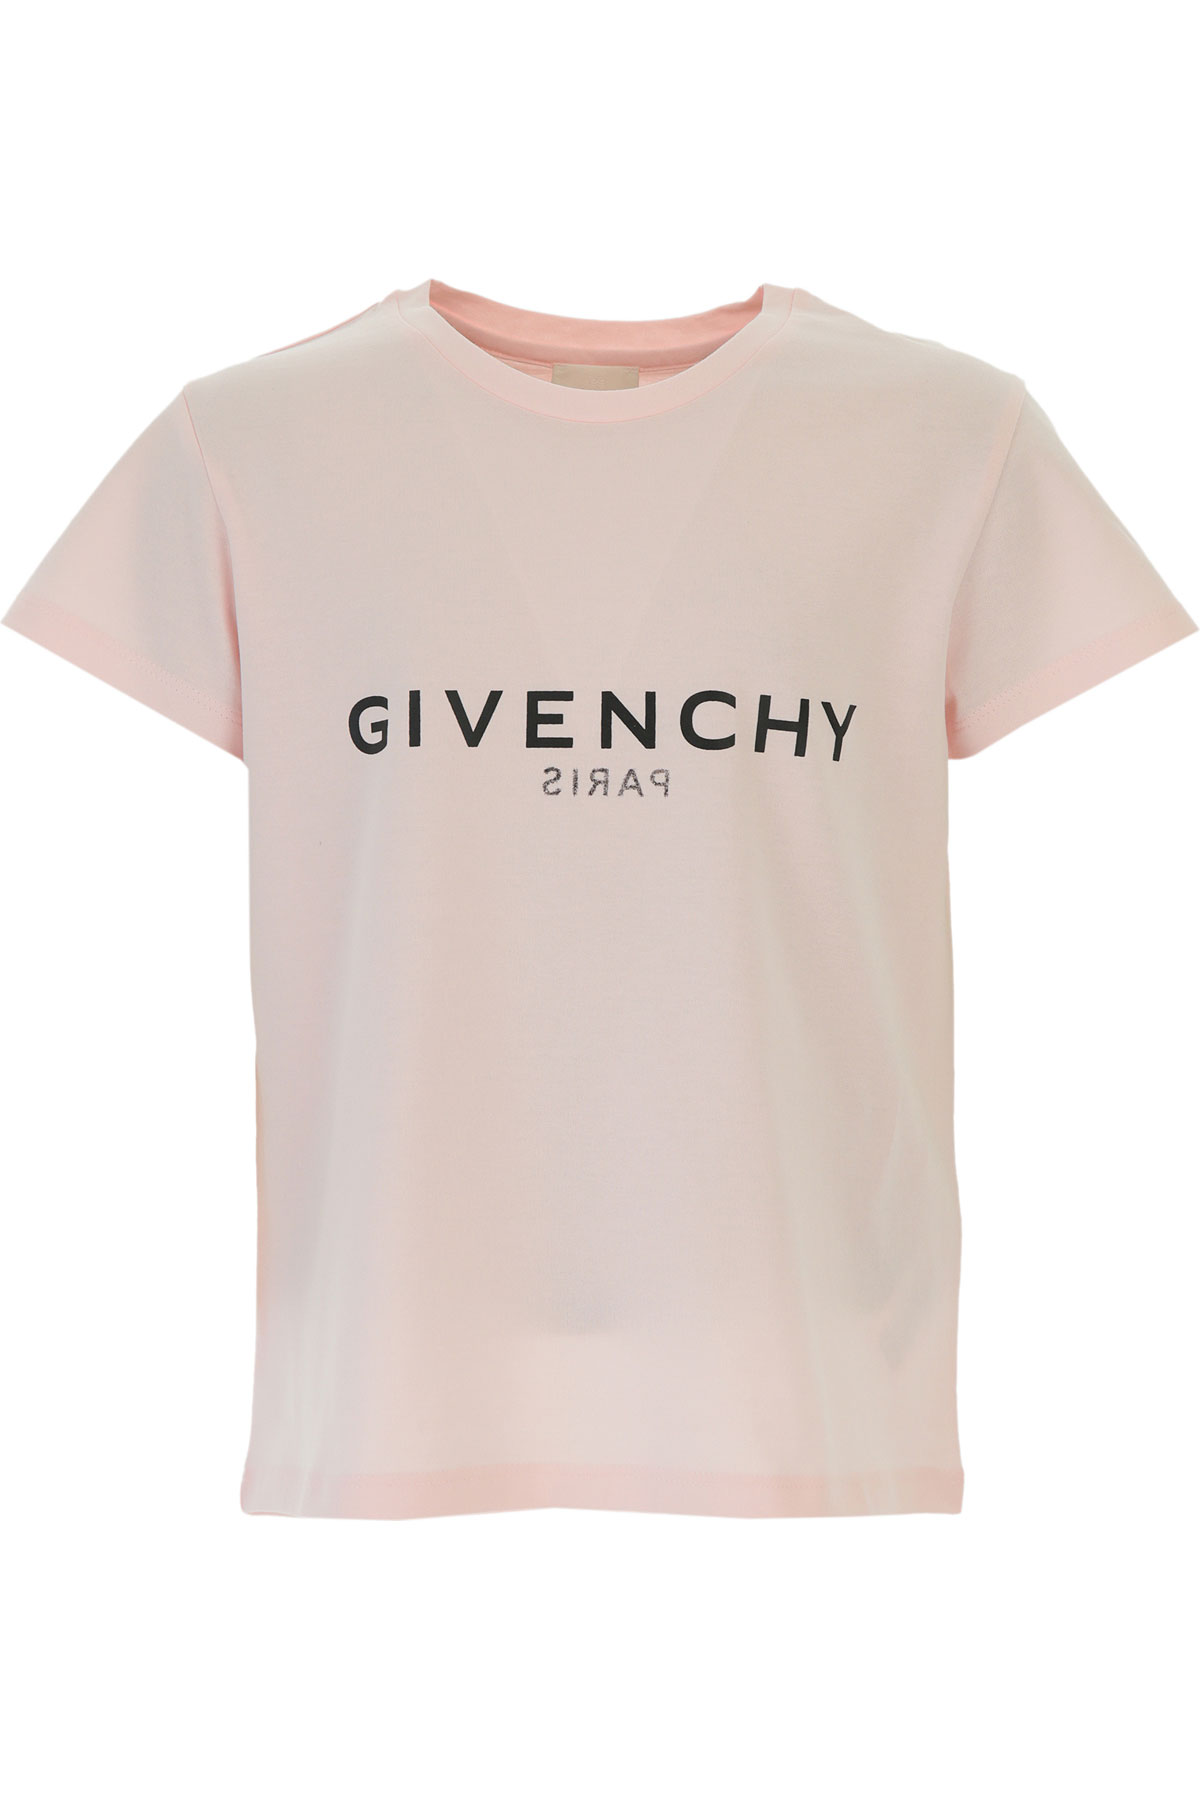 Girls Clothing Givenchy, Style code: h15275-44z-